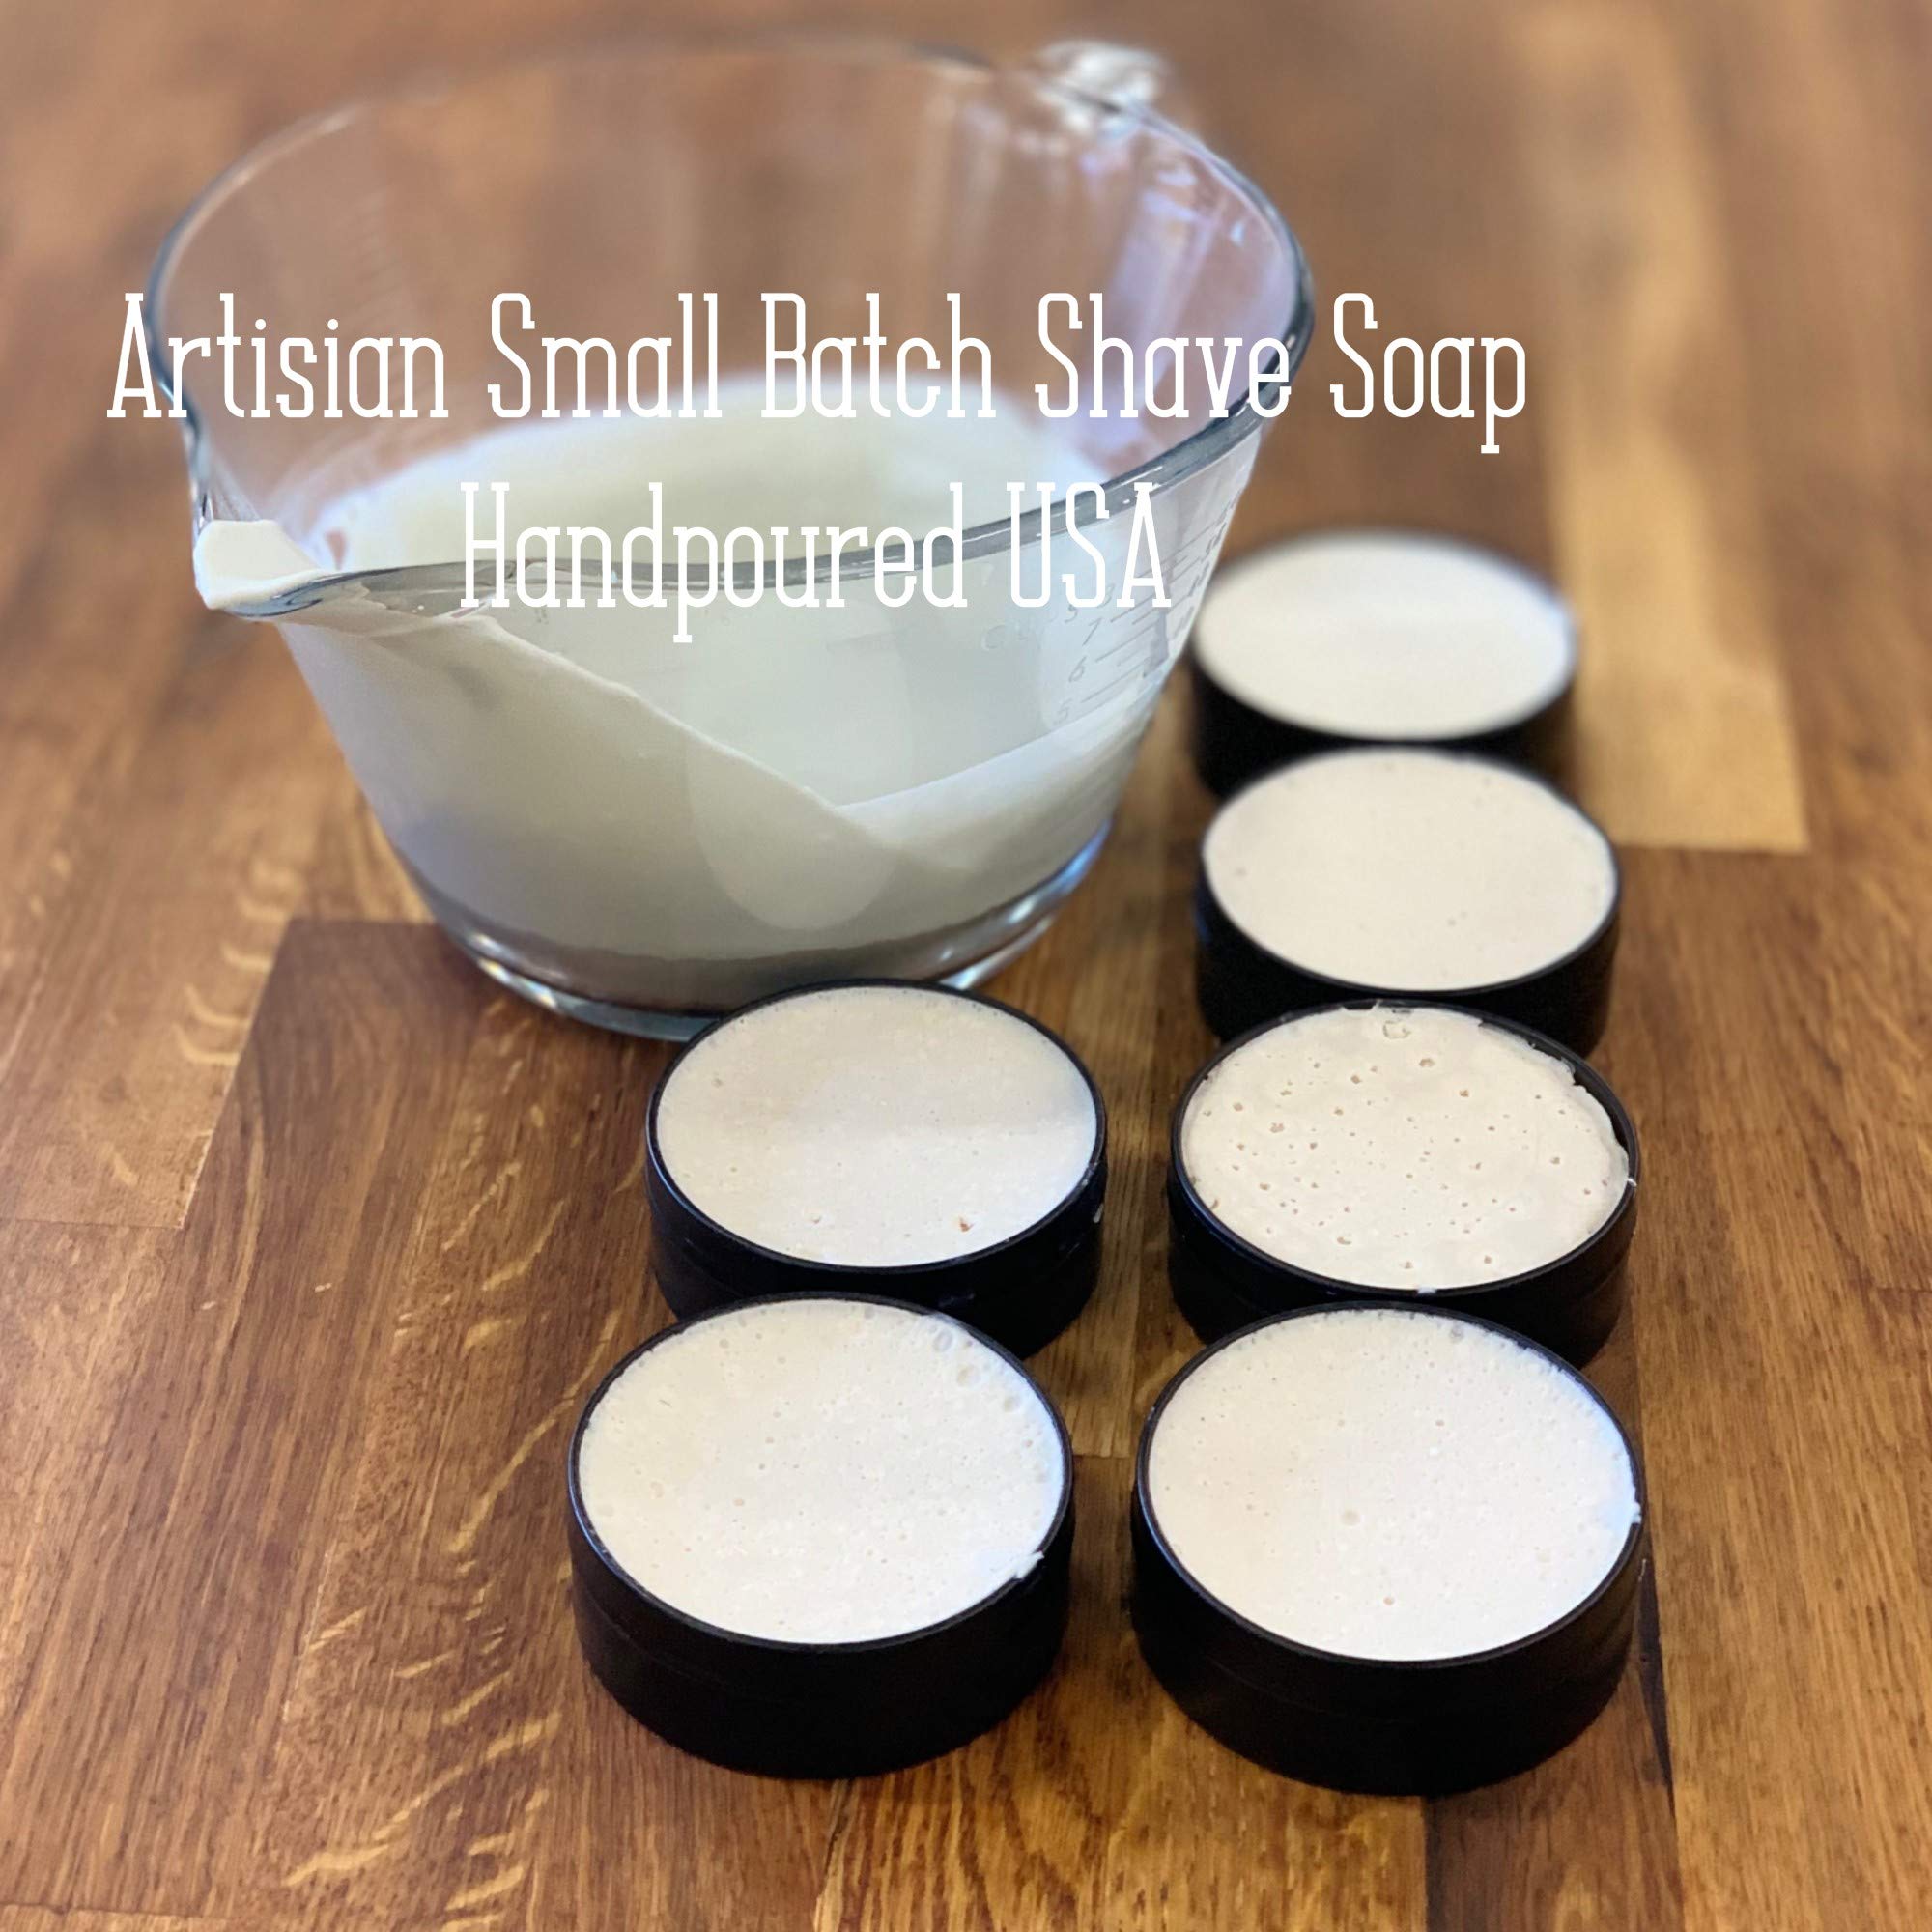 MNSC Mountain Man Artisan Small Batch Shave Soap for a Naturally Better Shave - Smooth Shave, Hypoallergenic, Prevent Nicks, Cuts, and Razor Burn, Handcrafted in USA, All-Natural, Plant-Derived